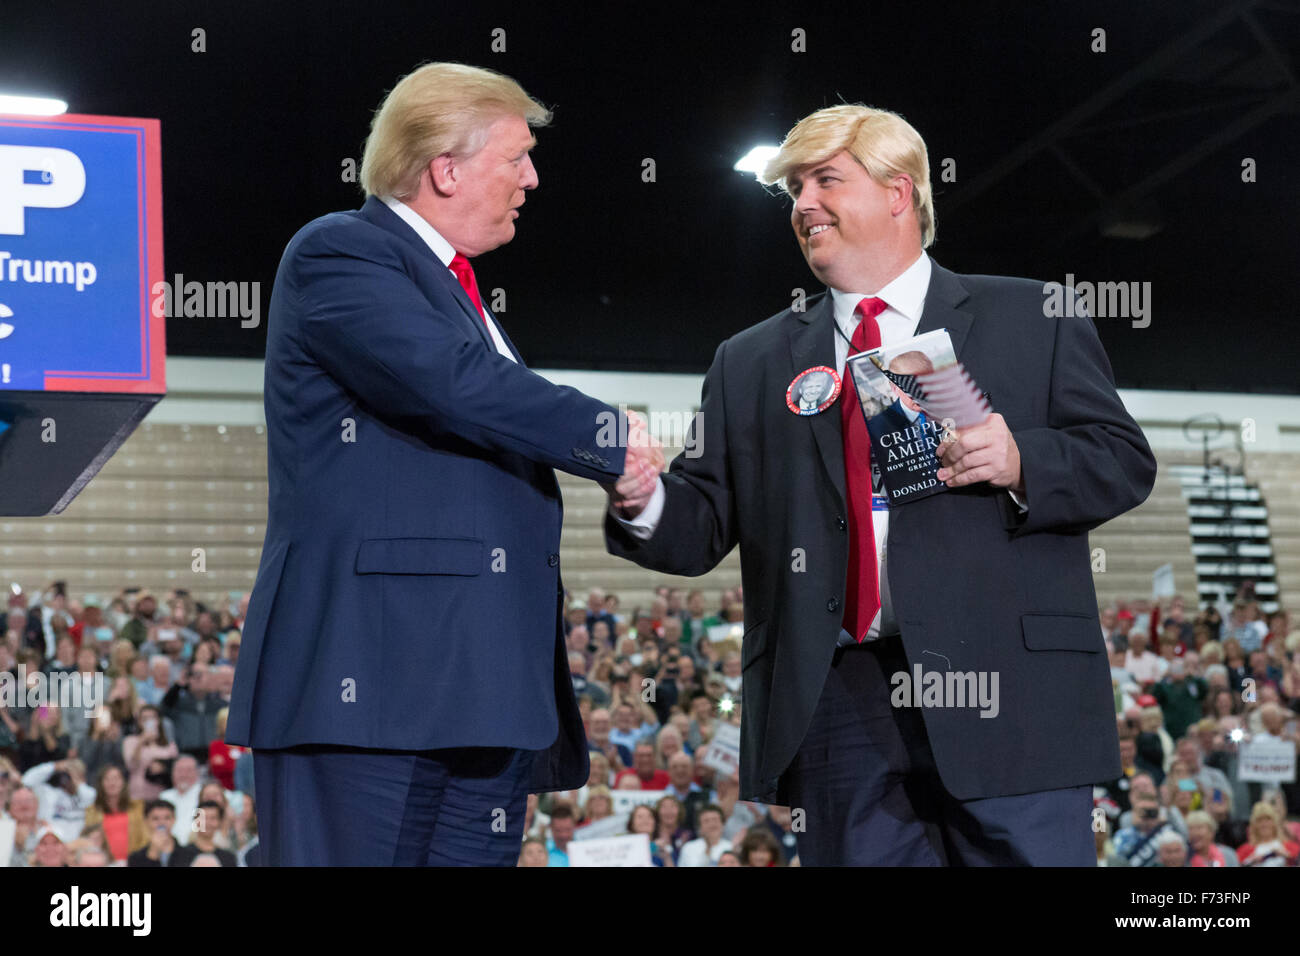 Myrtle Beach, South Carolina, USA. 24th Nov, 2015. Republican presidential candidate billionaire Donald Trump meets a look-a-like during a campaign rally at the Myrtle Beach Convention Center November 24, 2015 in Myrtle Beach, South Carolina. Stock Photo